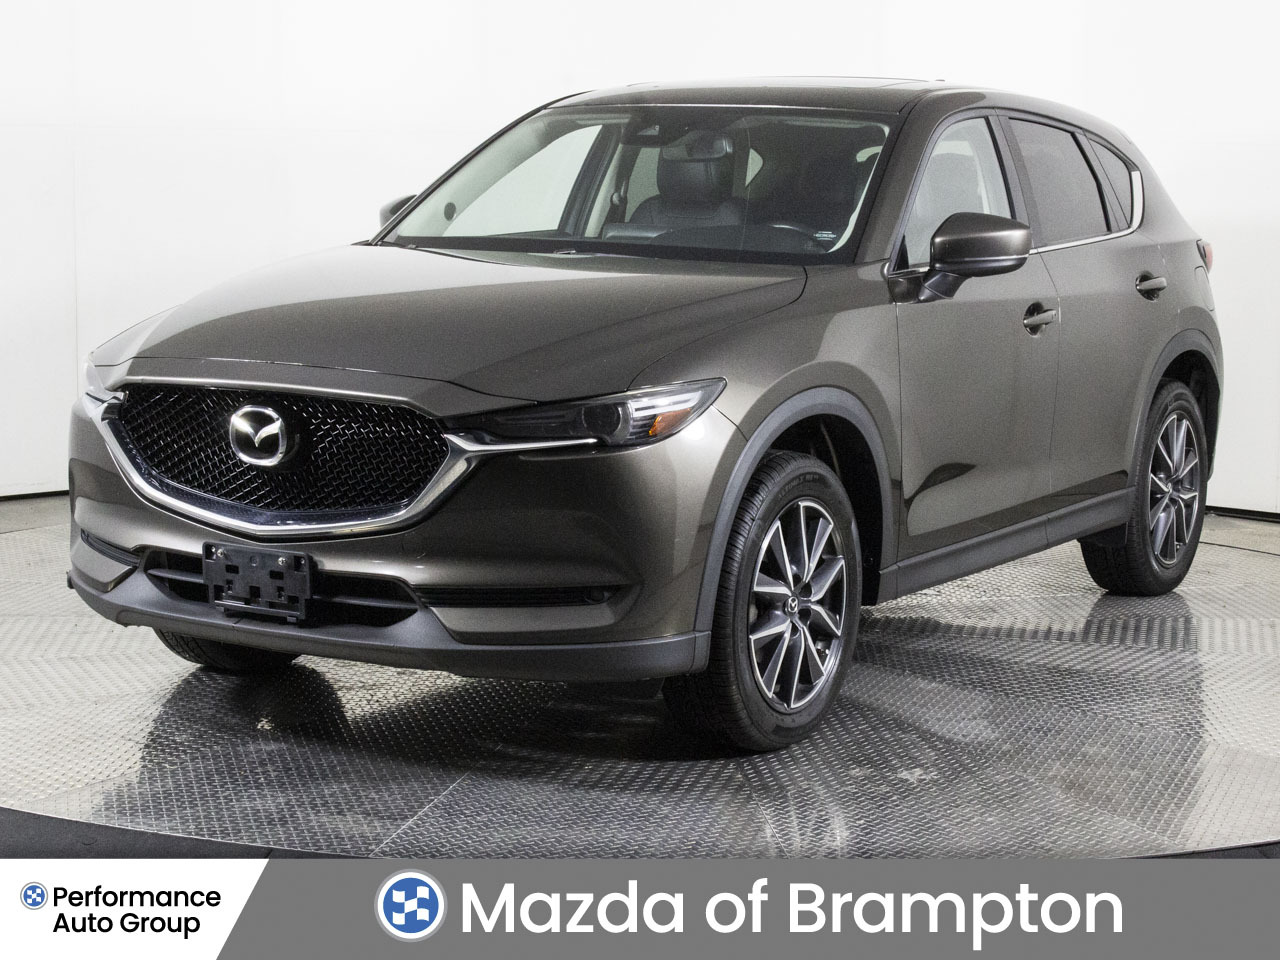 2017 Mazda CX-5 AWD GT LEATHER BOSE NAVIGATION WINTER TIRES INCL!